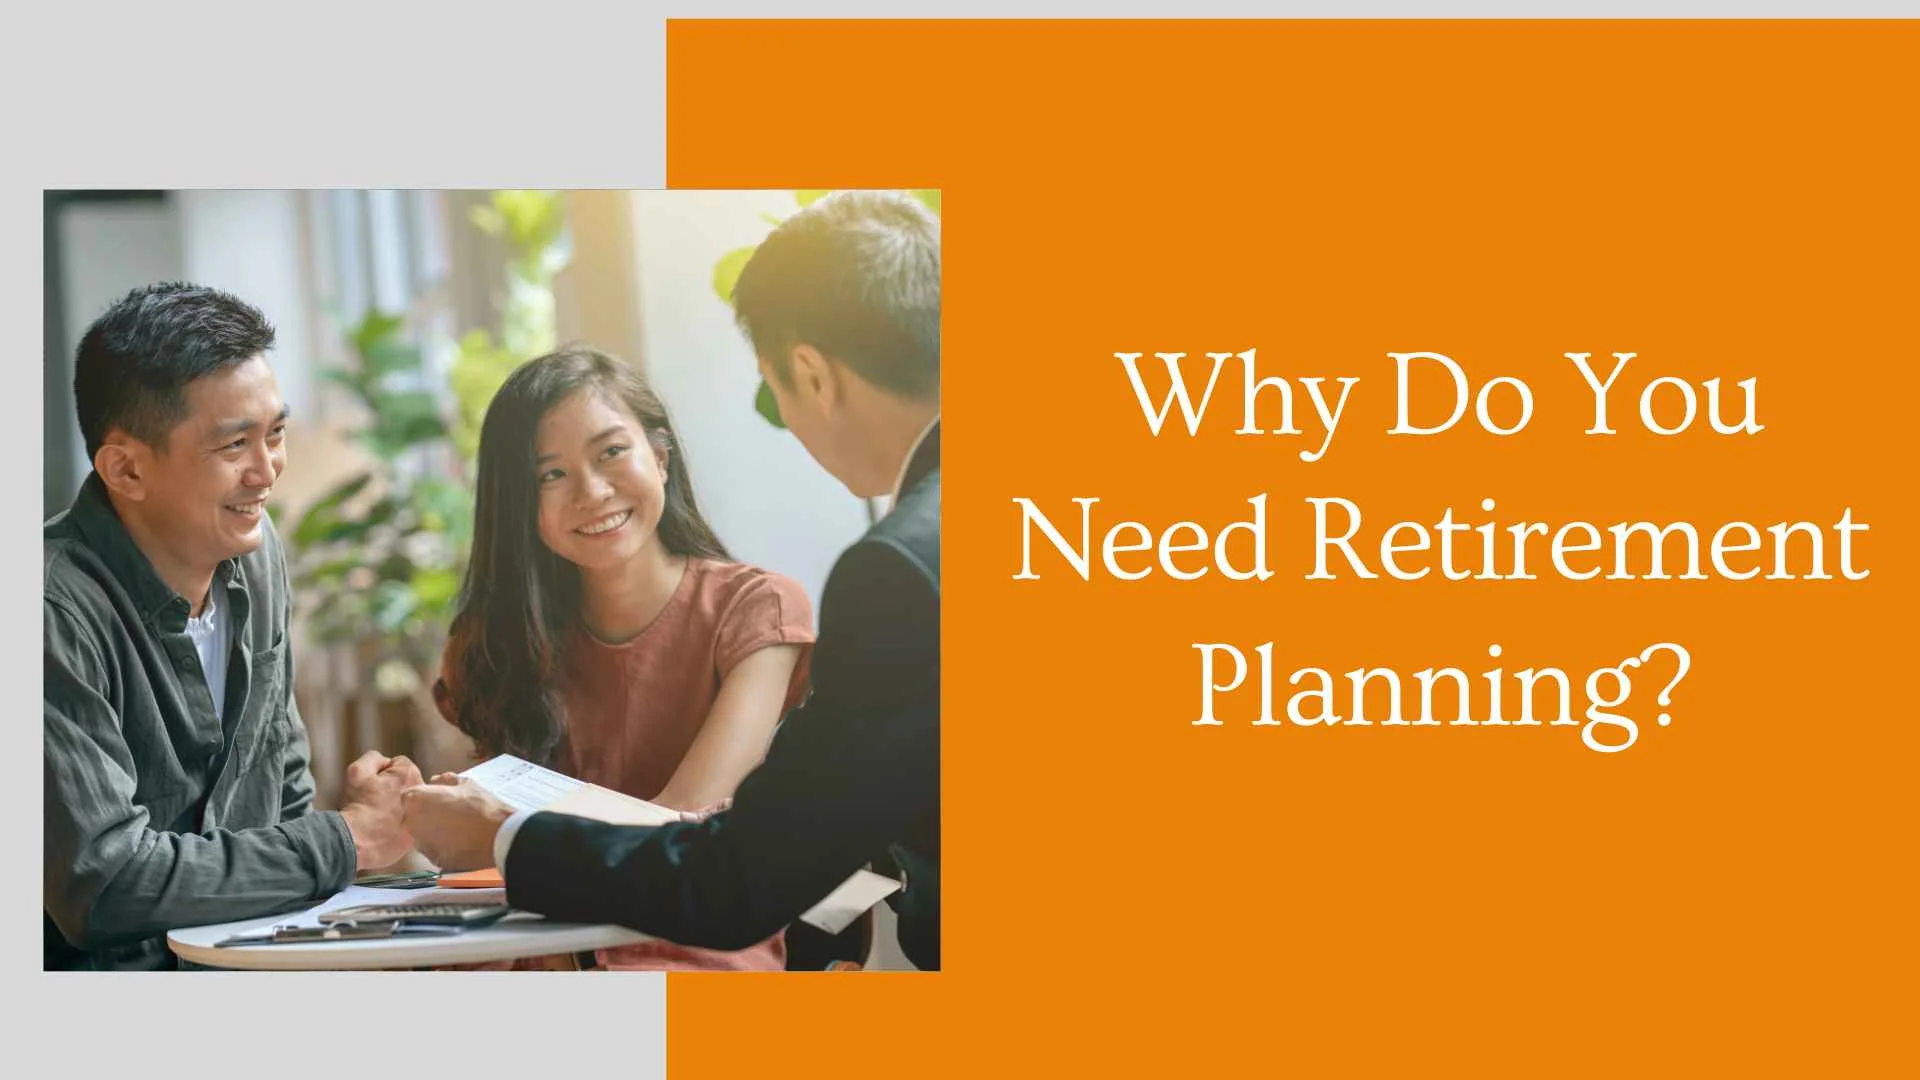 Why Do You Need Retirement Planning